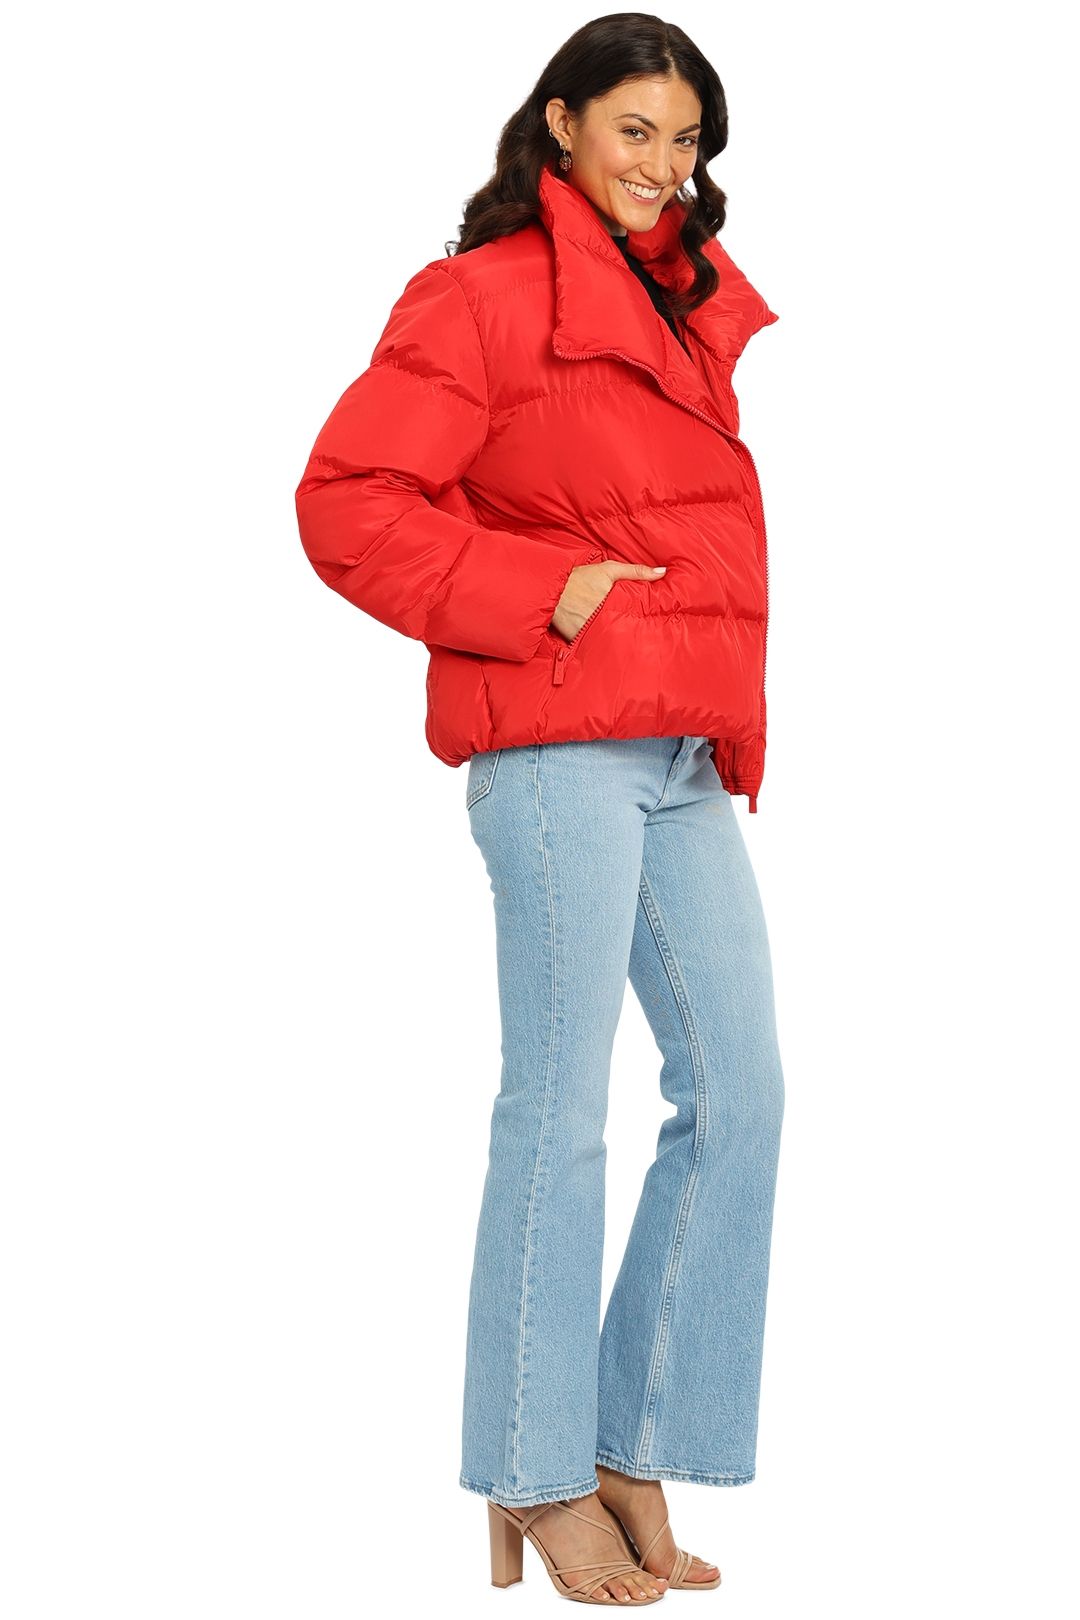 Toast Society Jupiter Puffer Red quilted